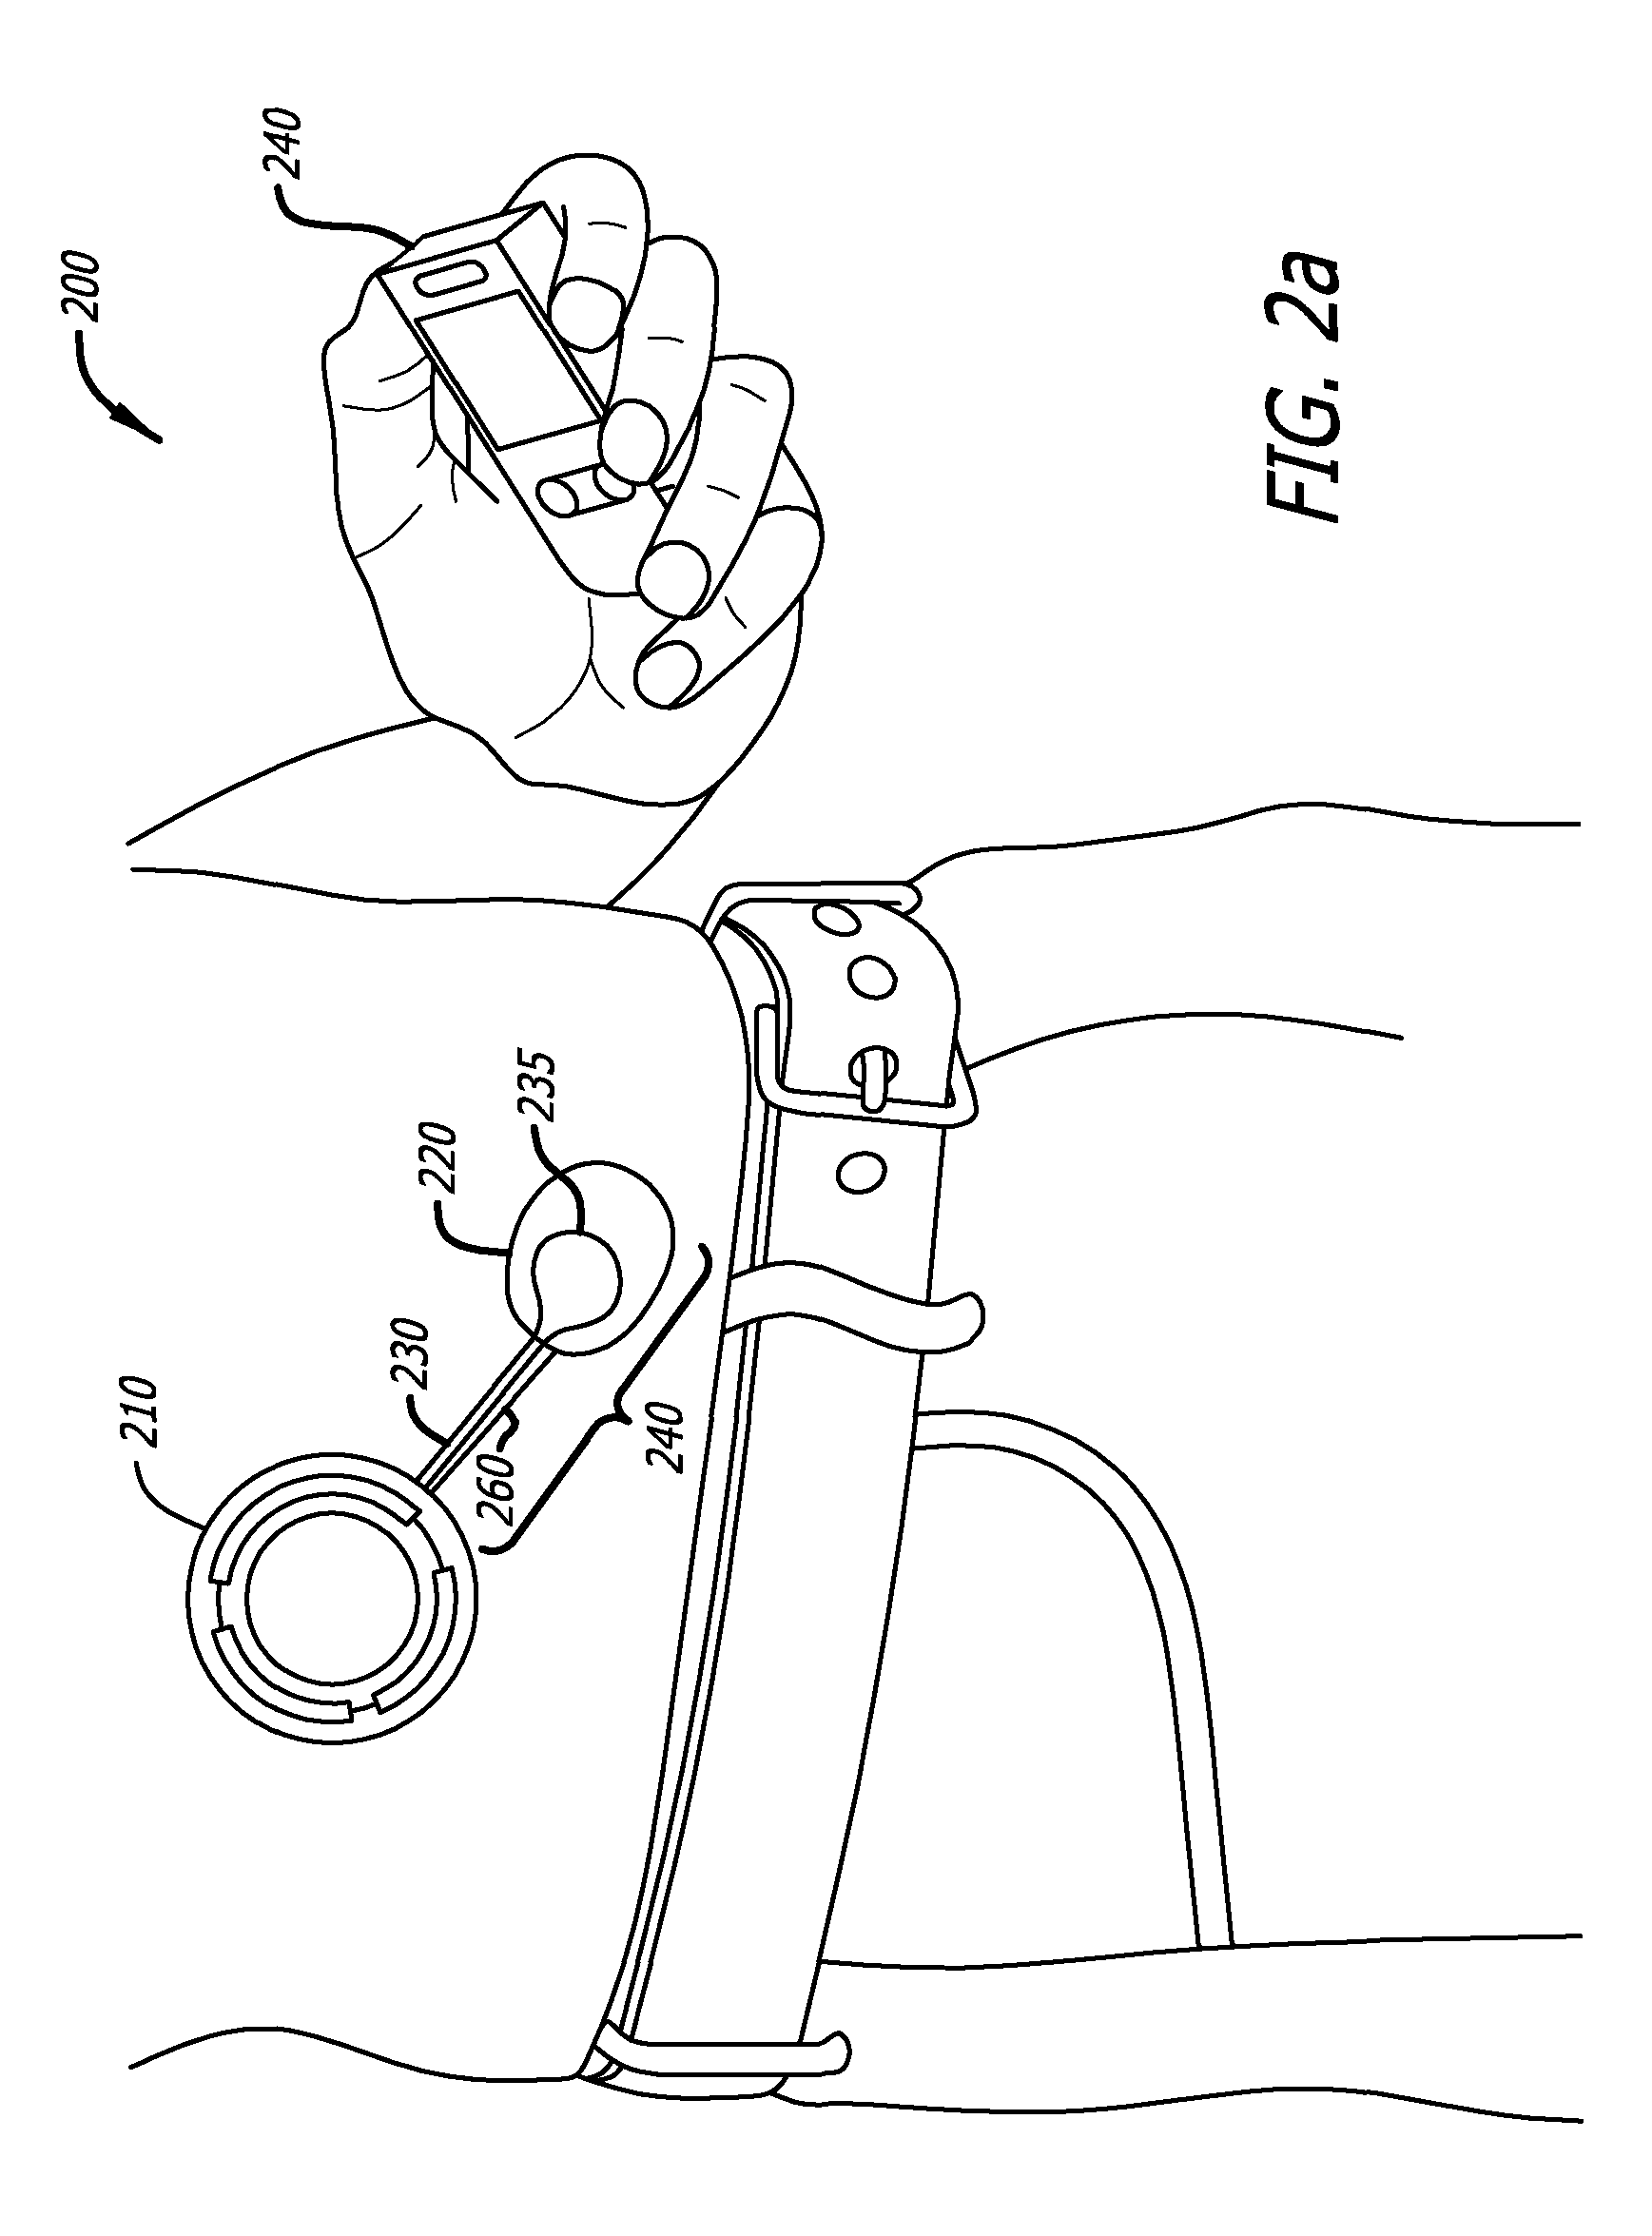 Medical device antenna systems having external antenna configurations